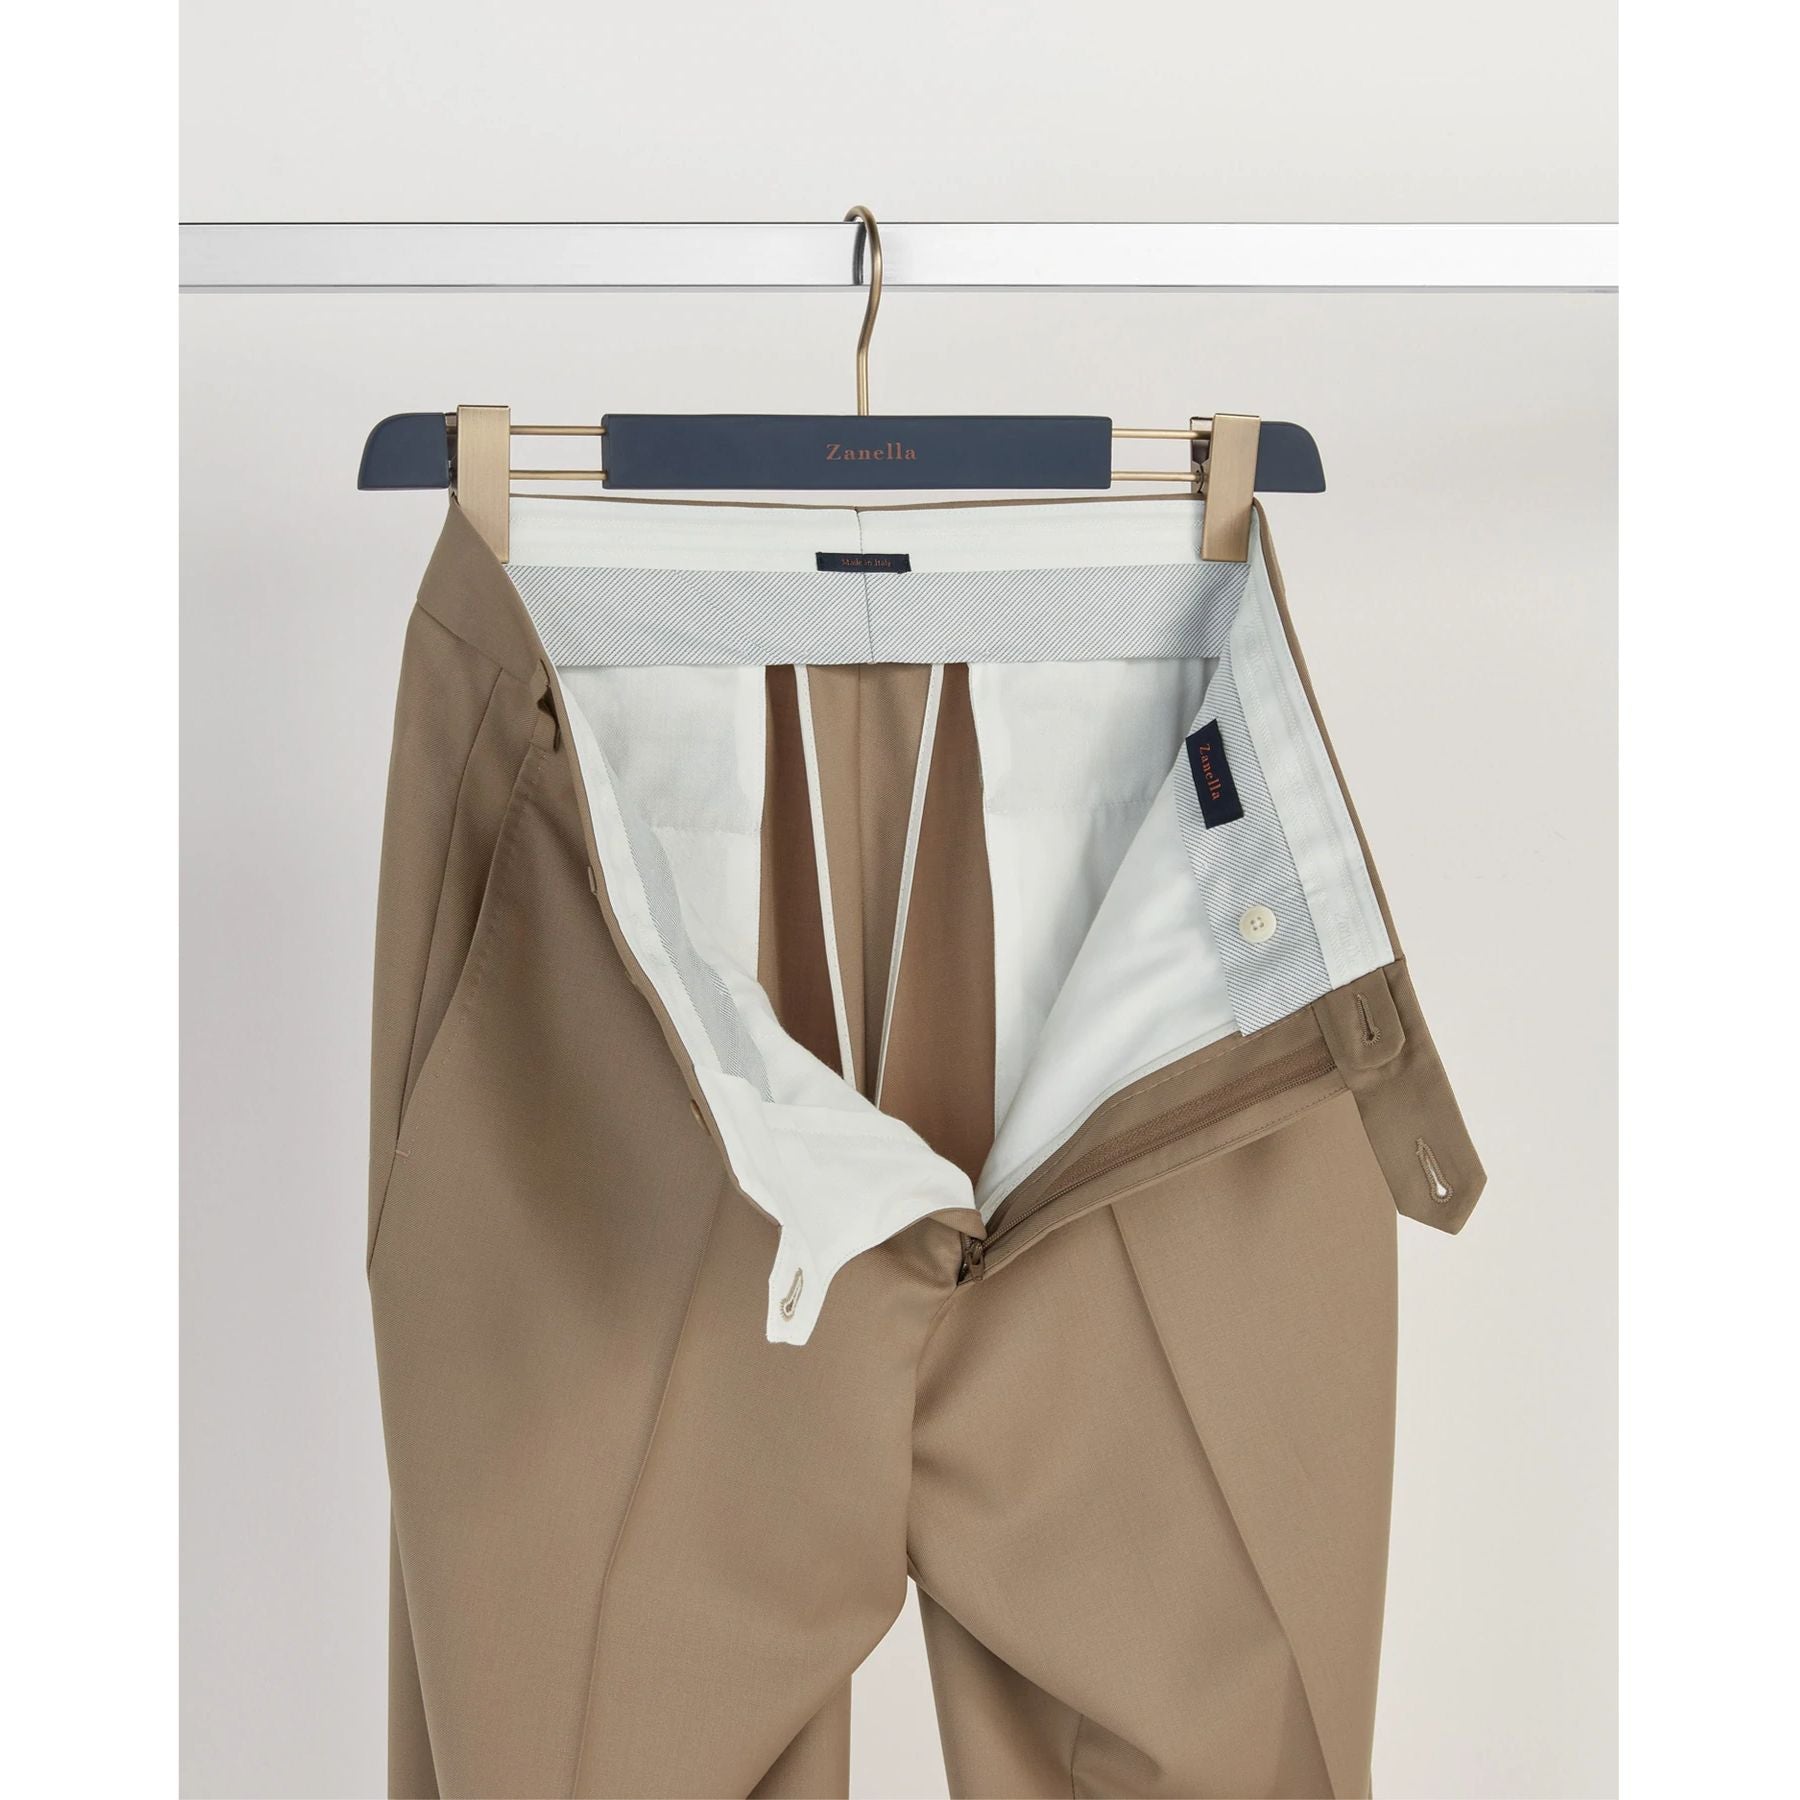 Todd Flat Front Super 120s Wool Serge Trouser in Tan (Full Fit) by Zanella